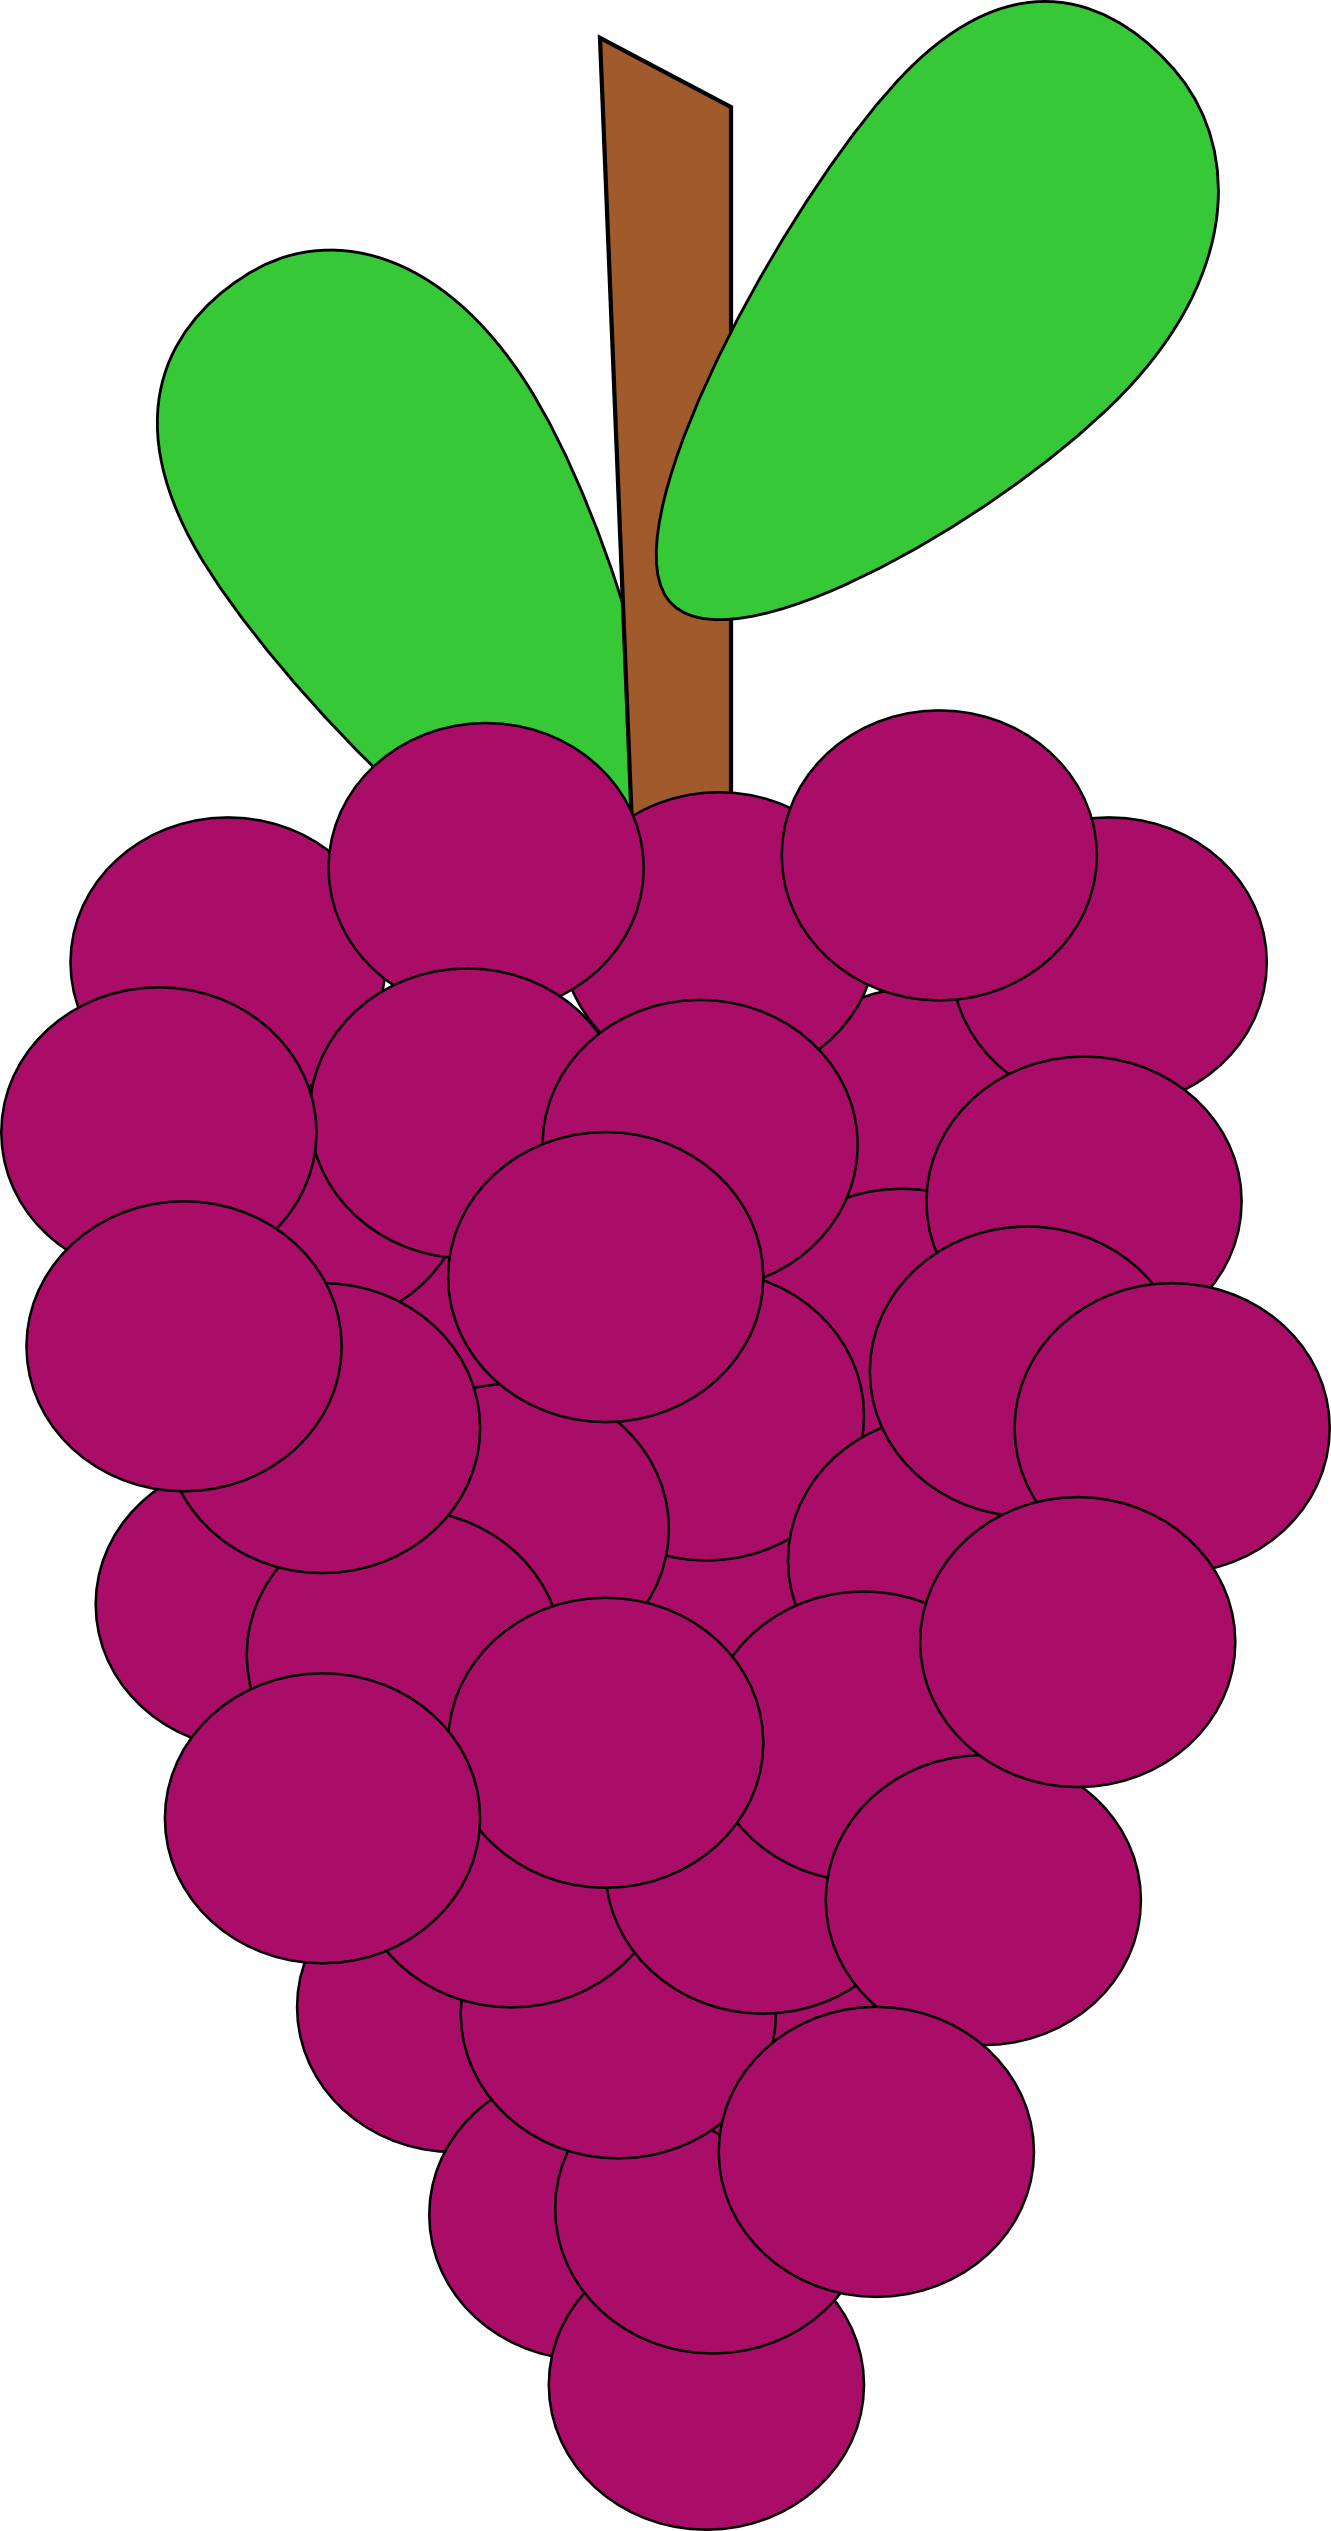 clipart green grapes - photo #28